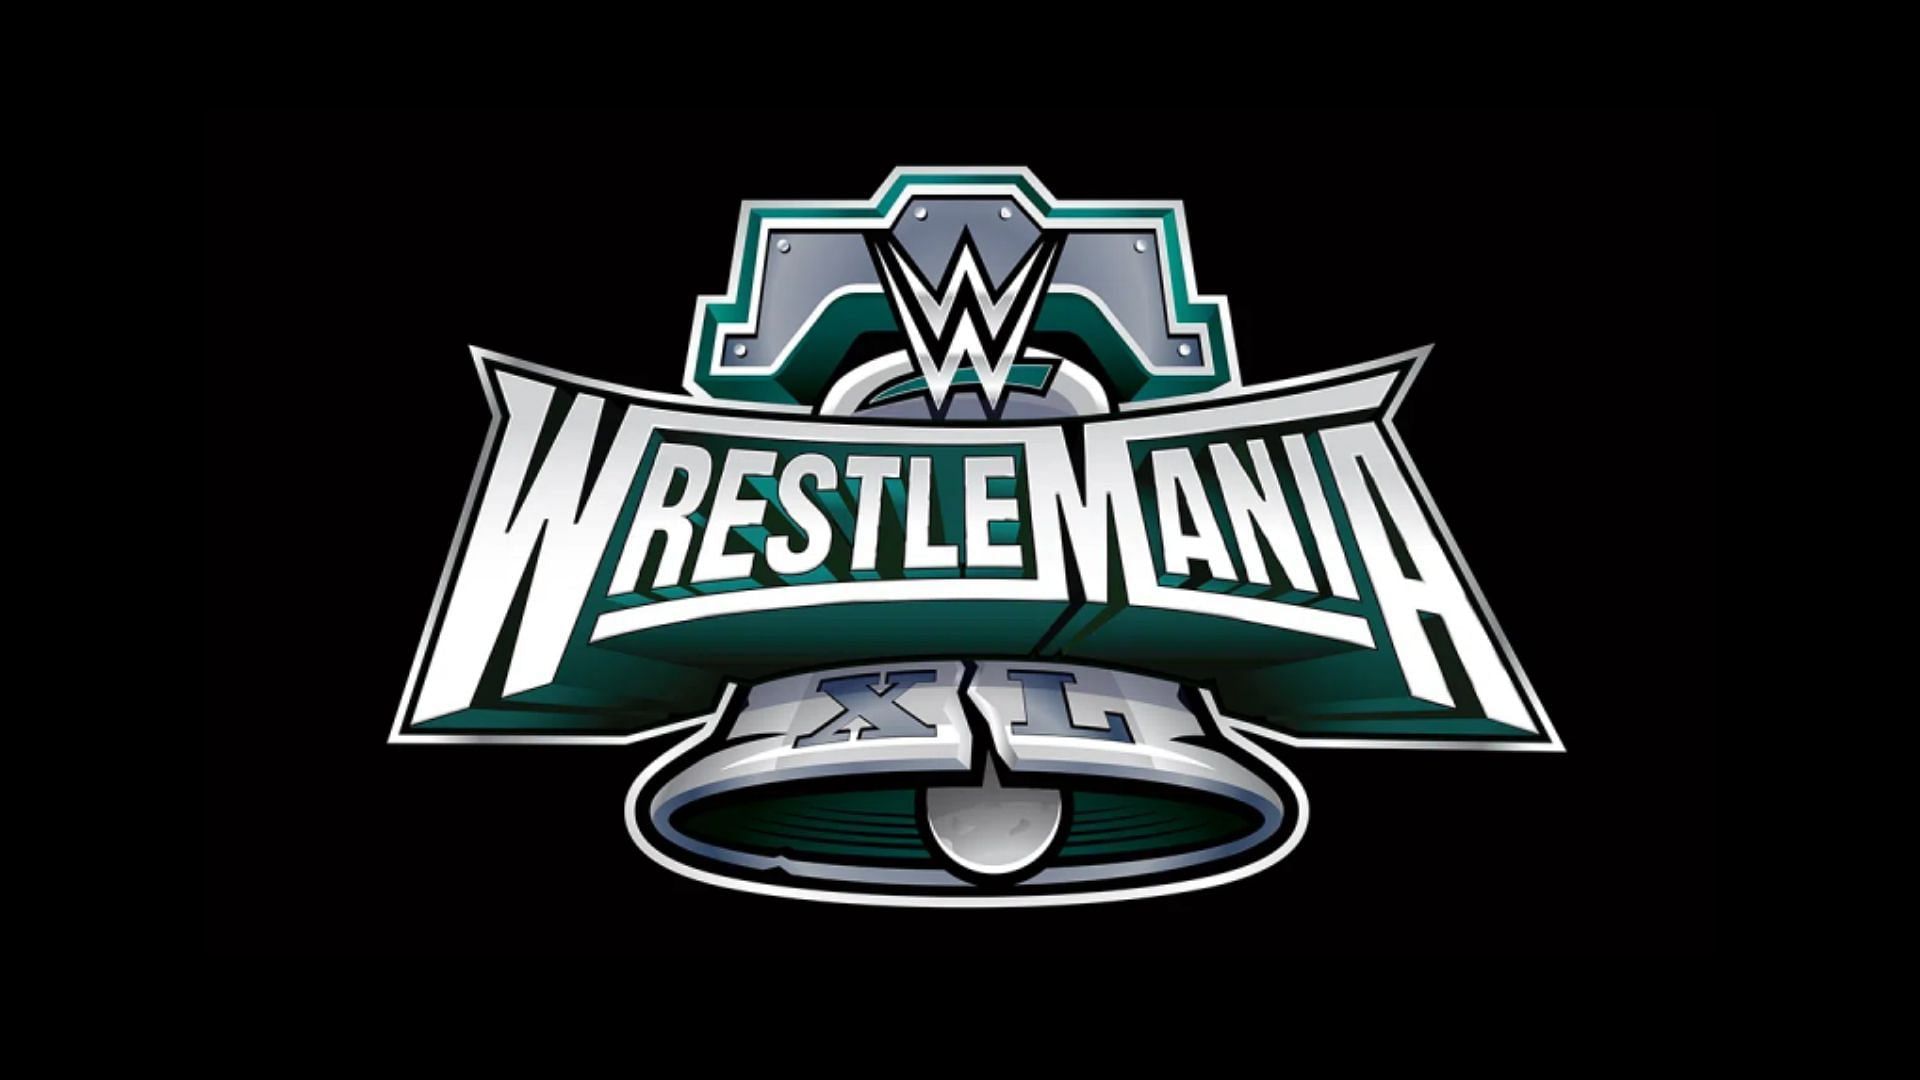 WrestleMania 40 will take place in 2024